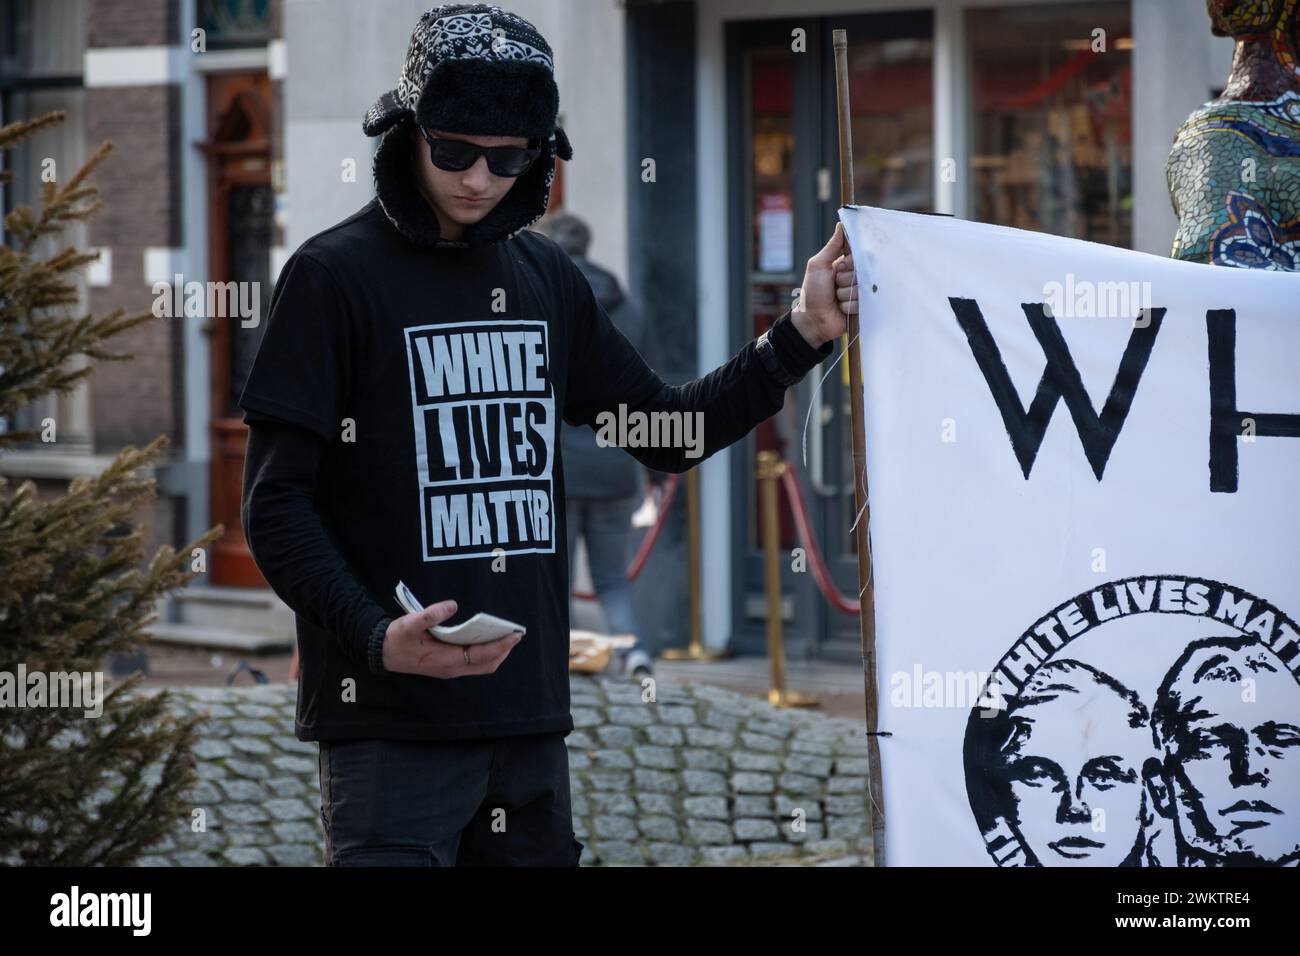 Gouda, Netherlands 17.02.24. Dutch faction of far right wing movement White Lives Matter perform public demonstration protest in city centre. Stock Photo